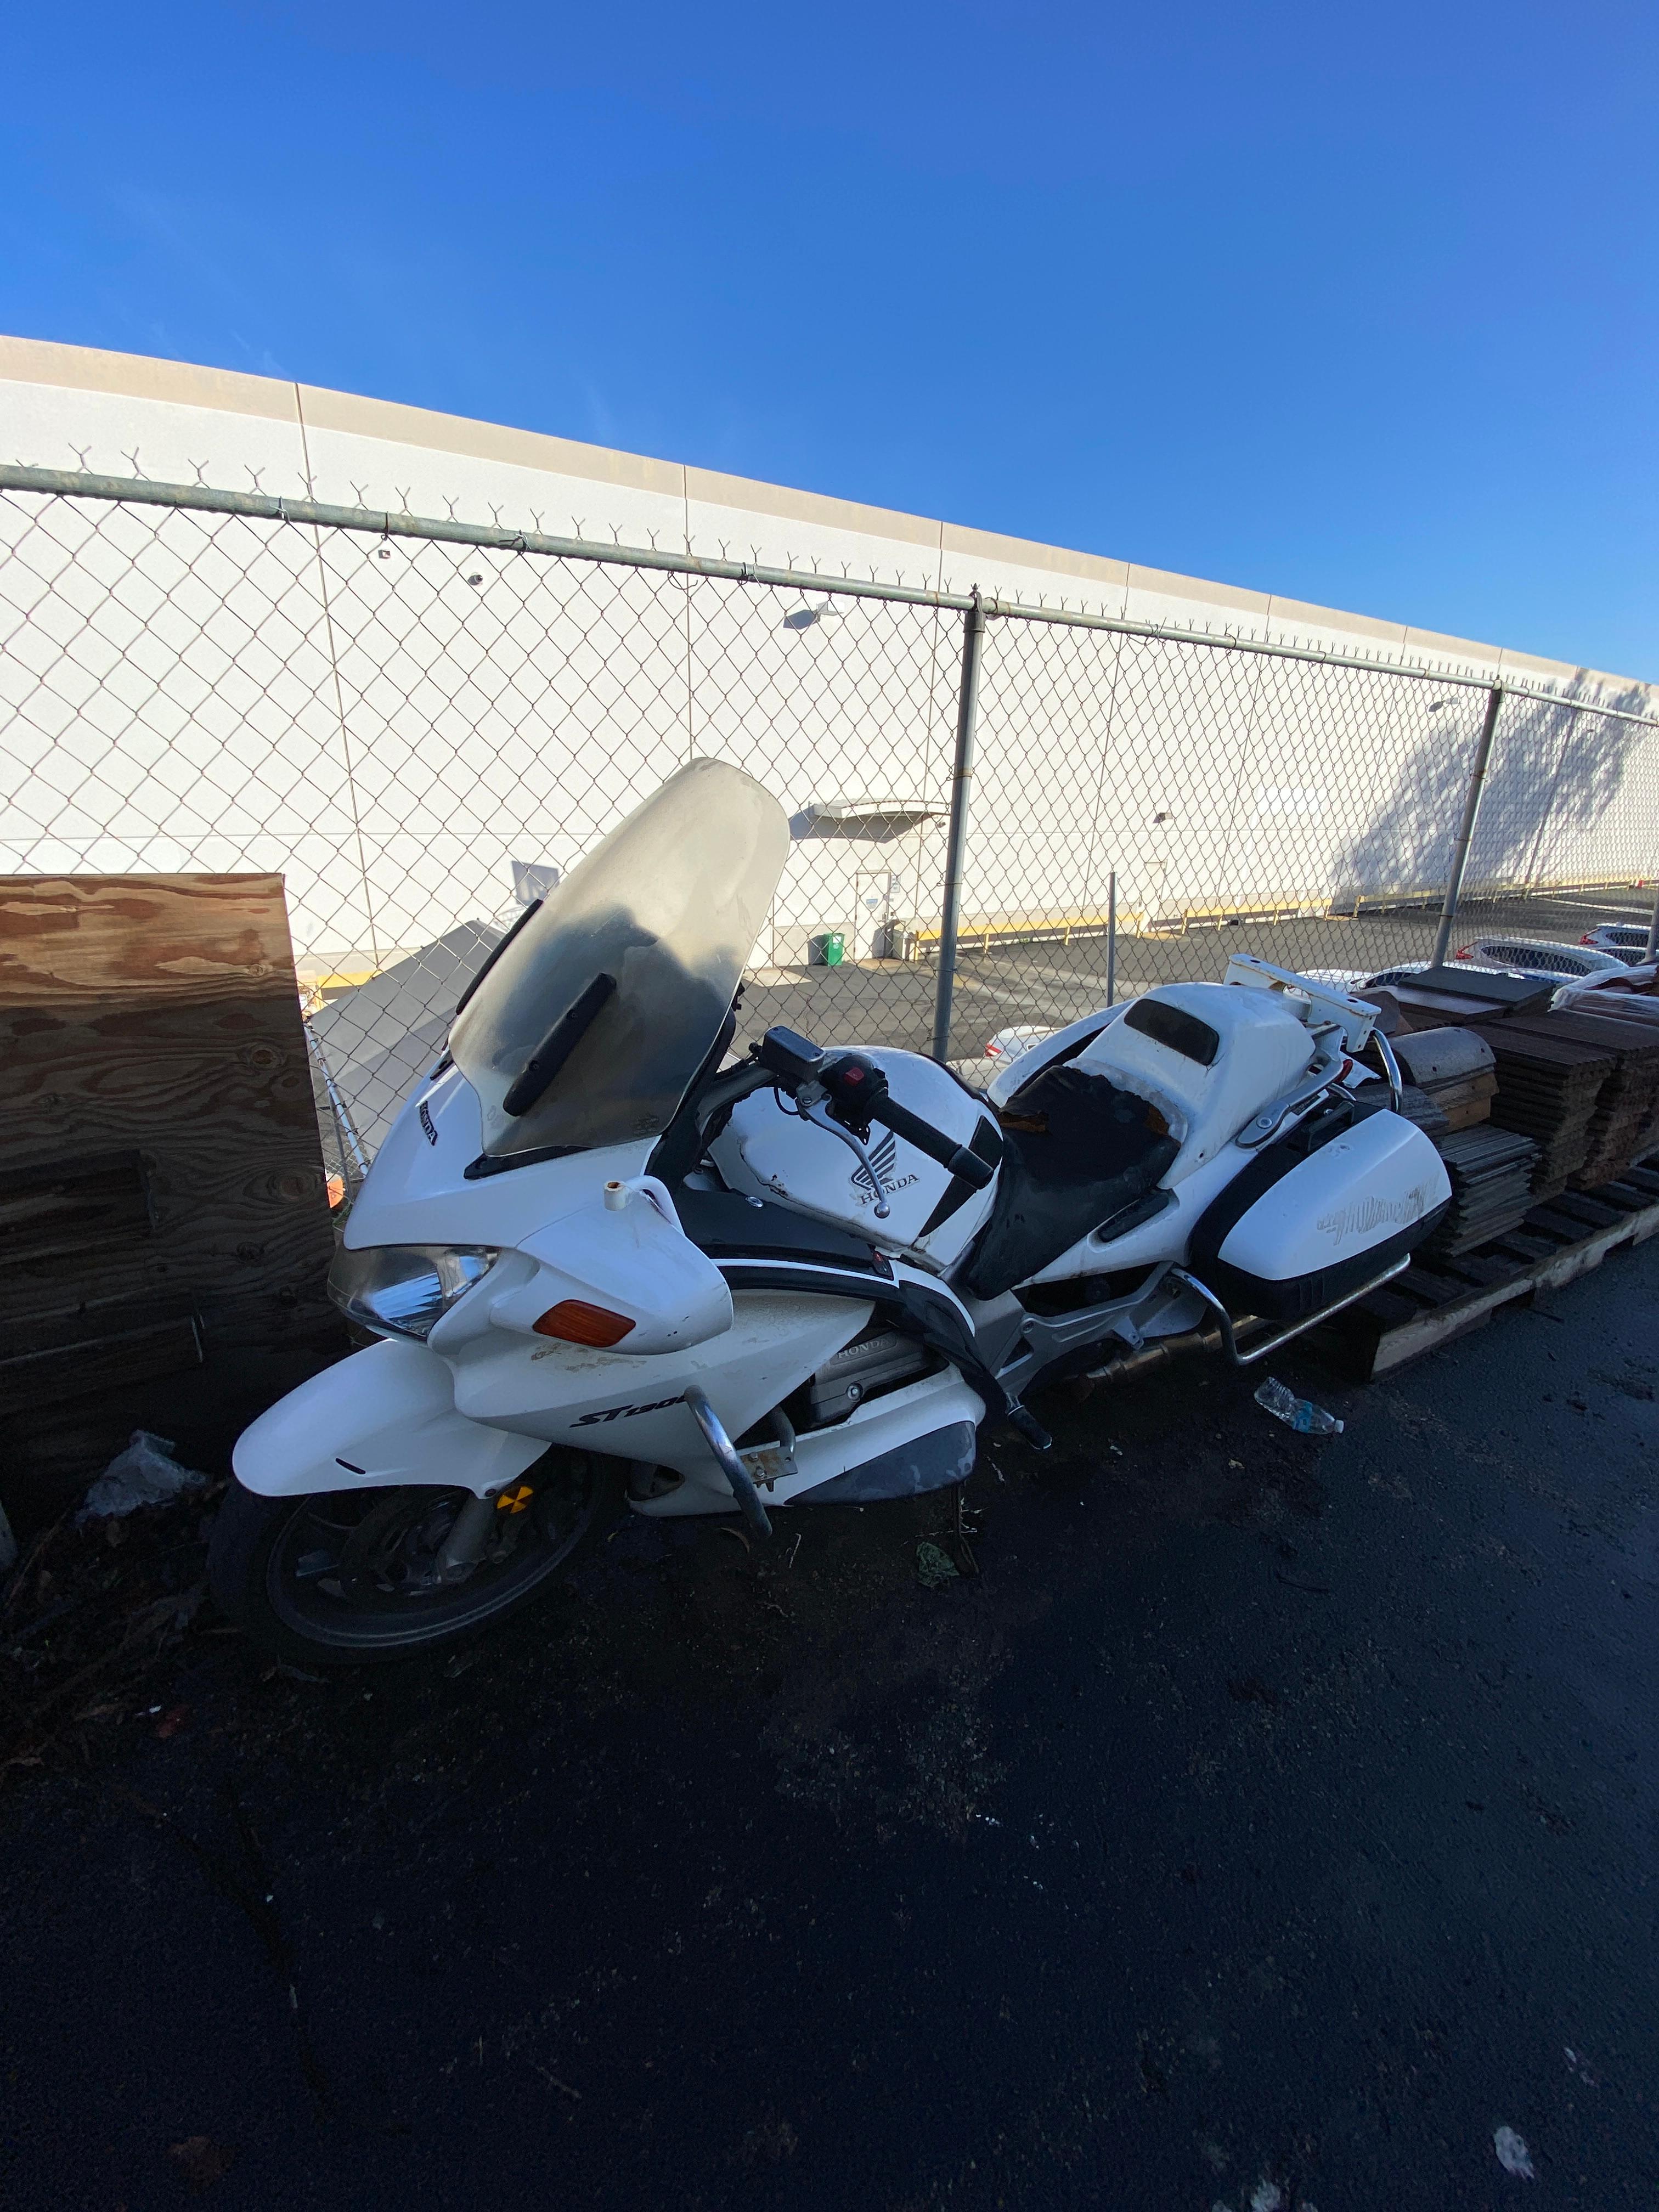 2006 Honda ST1300P Motorcycle - White Color